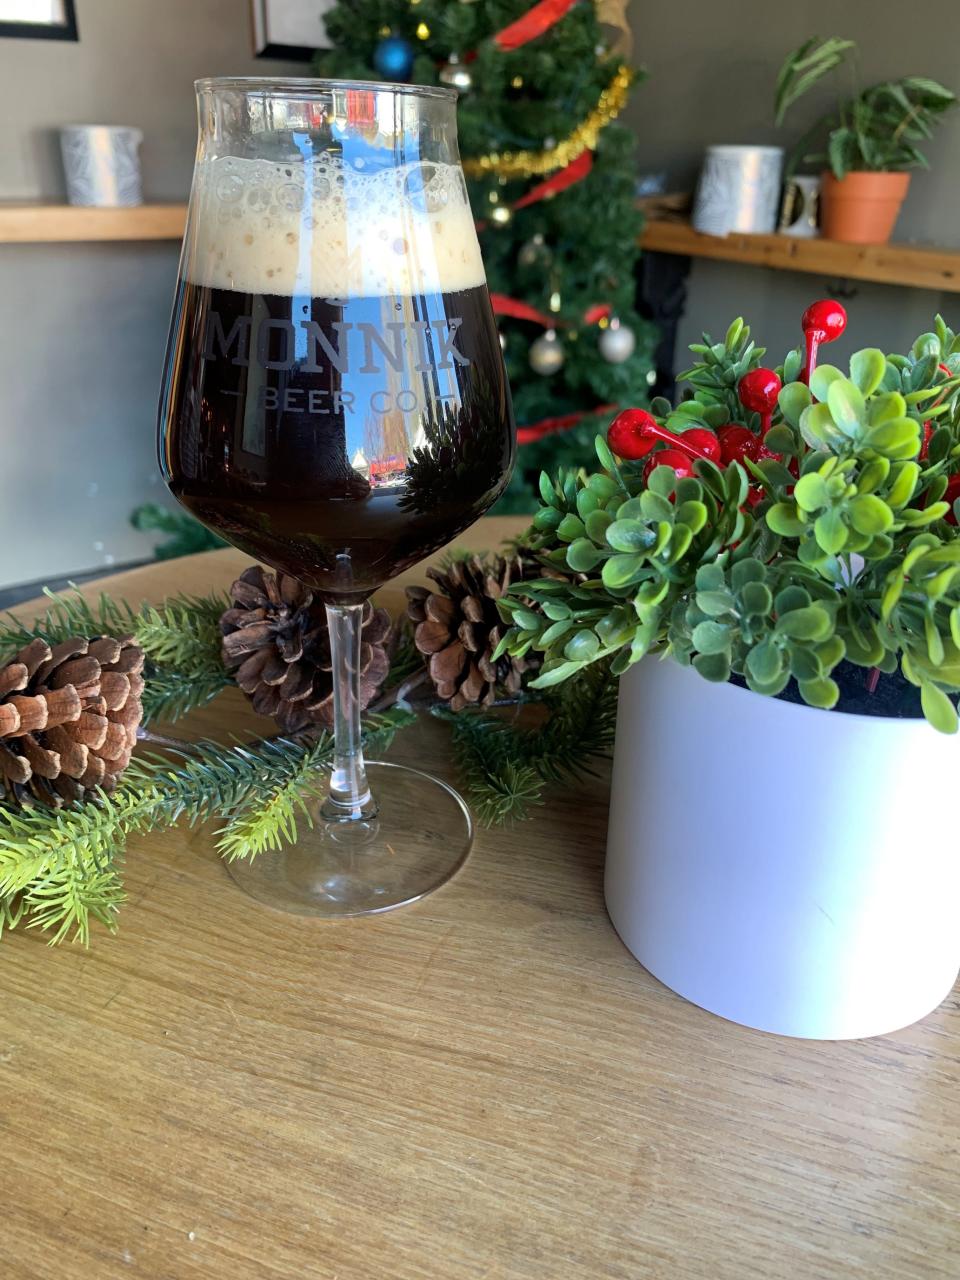 This year, Monnik Beer Company is treating customers to Ma’amoul, a dark farmhouse ale. It's inspired by a Turkish holiday cookie of the same name.